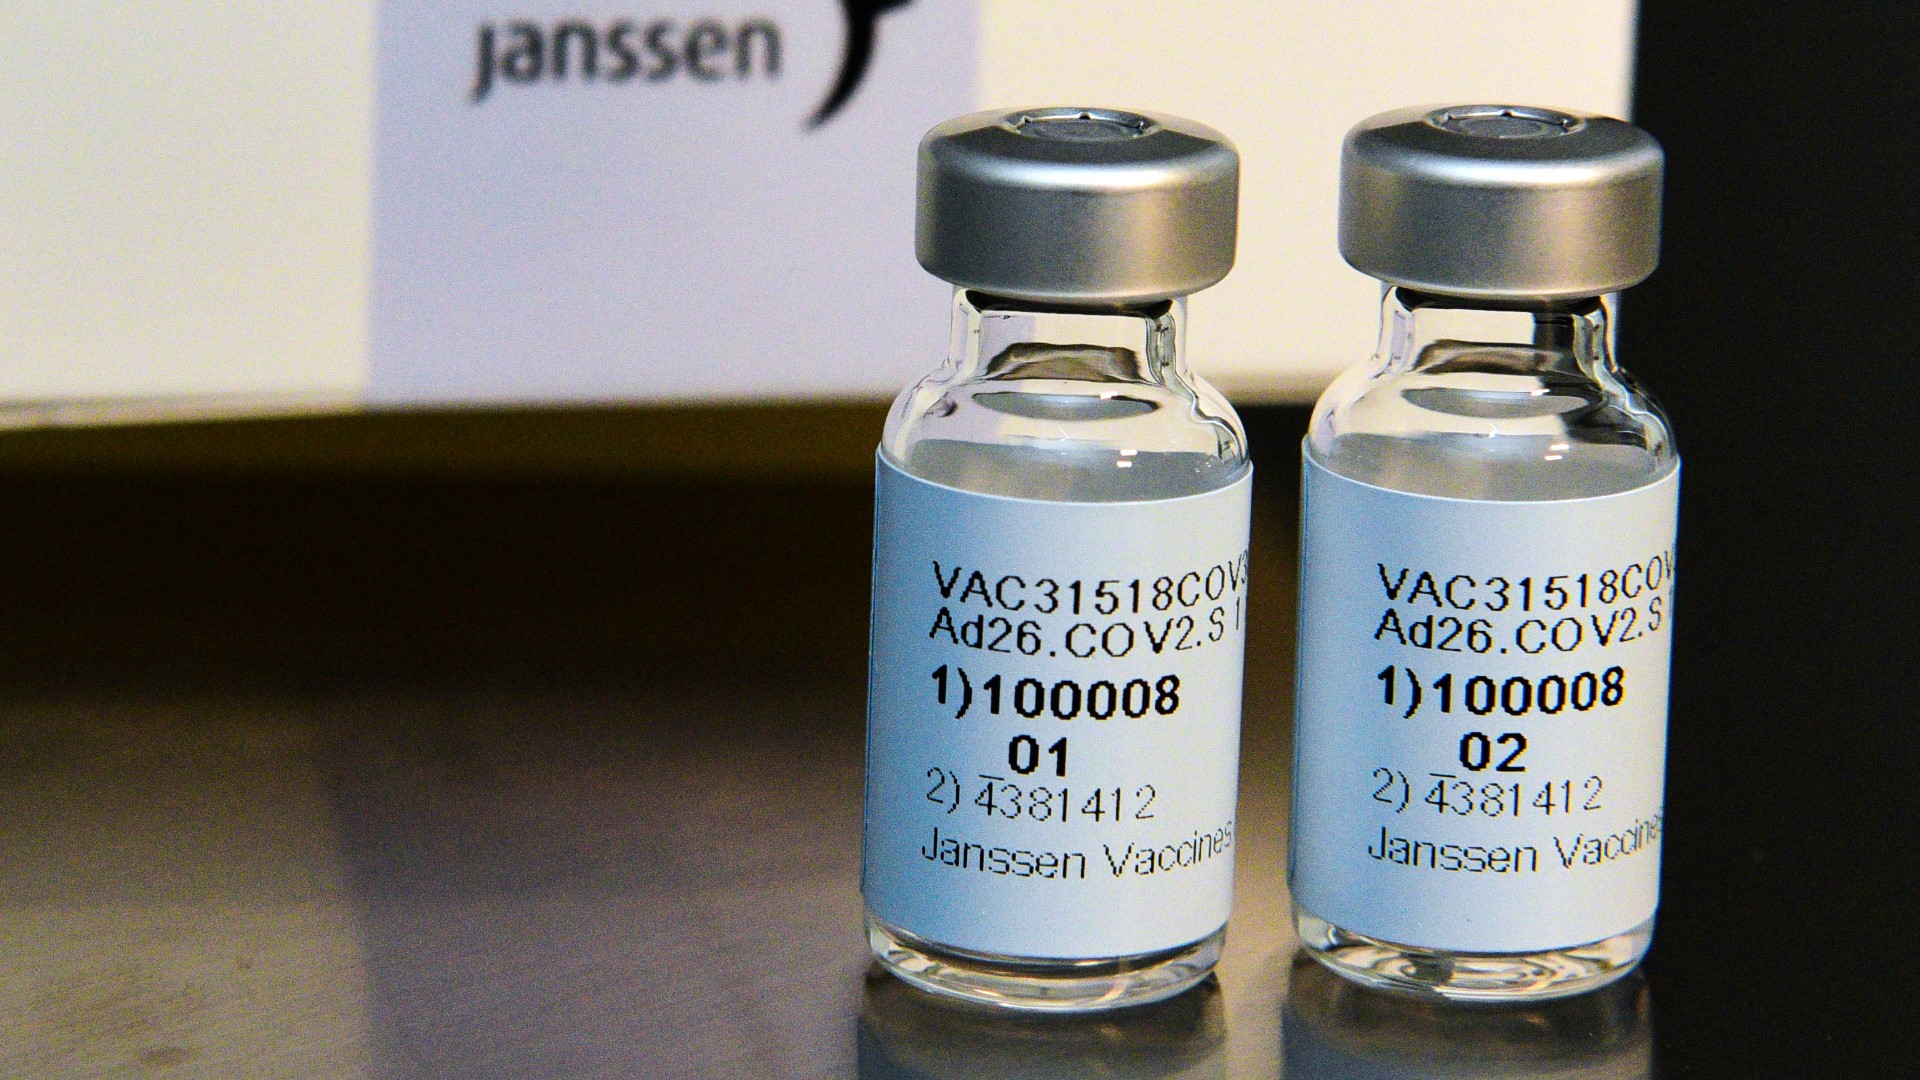 ISDH is working to minimize scheduled vaccine appointments after the FDA and CDC ordered a pause on the Johnson & Johnson.